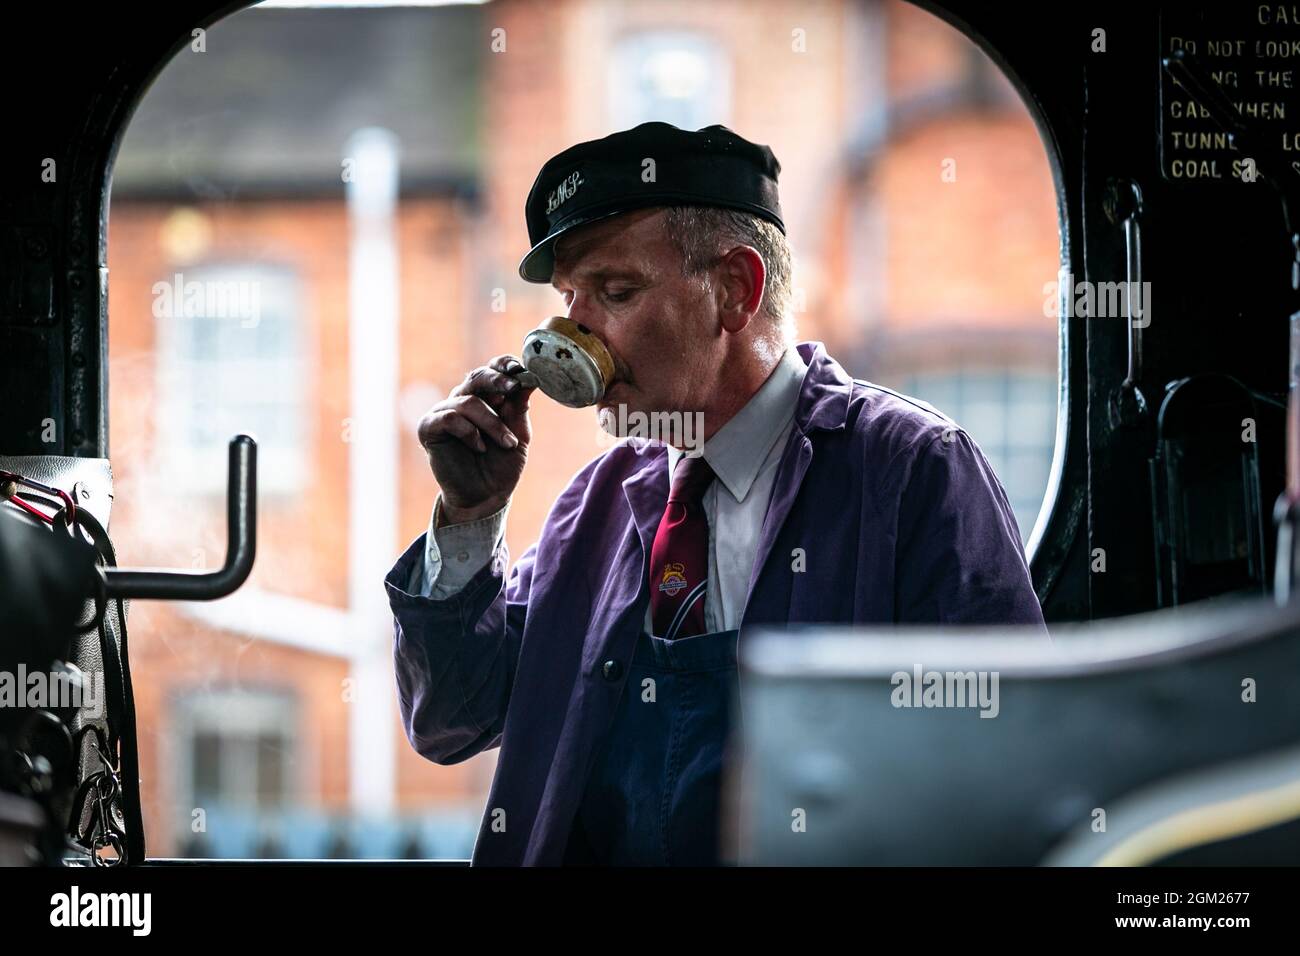 Kidderminster, Worcs, UK. 16th Sep, 2021. A steam train driver is silhouetted in his cab as he has a cup of tea from his tea can before embarking on a day's travel on the opening day of the Severn Valley Railway's Autumn Steam Gala, Kidderminster, Worcestershire. The gala lasts until Sunday 19th September and features guest locos. Credit: Peter Lopeman/Alamy Live News Stock Photo